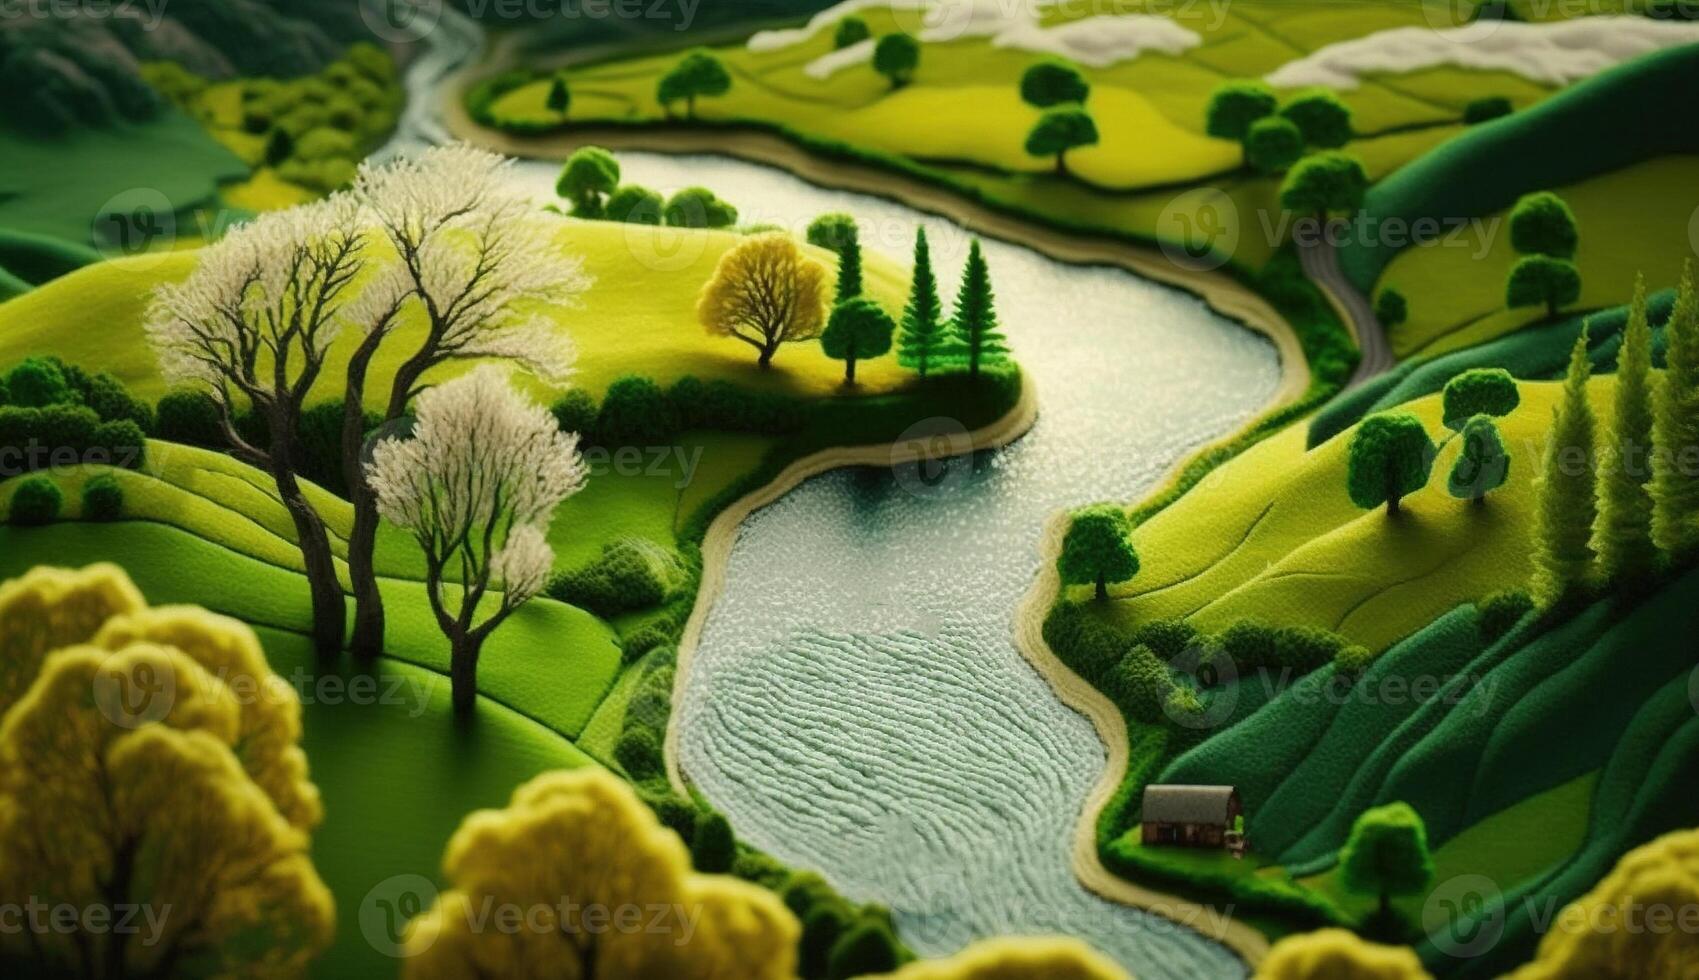 , cute farm landscape made of crochet with trees, river, green grass. Dreamy agricultural scene made of wool materials, fabric, yarn, sewing for background photo